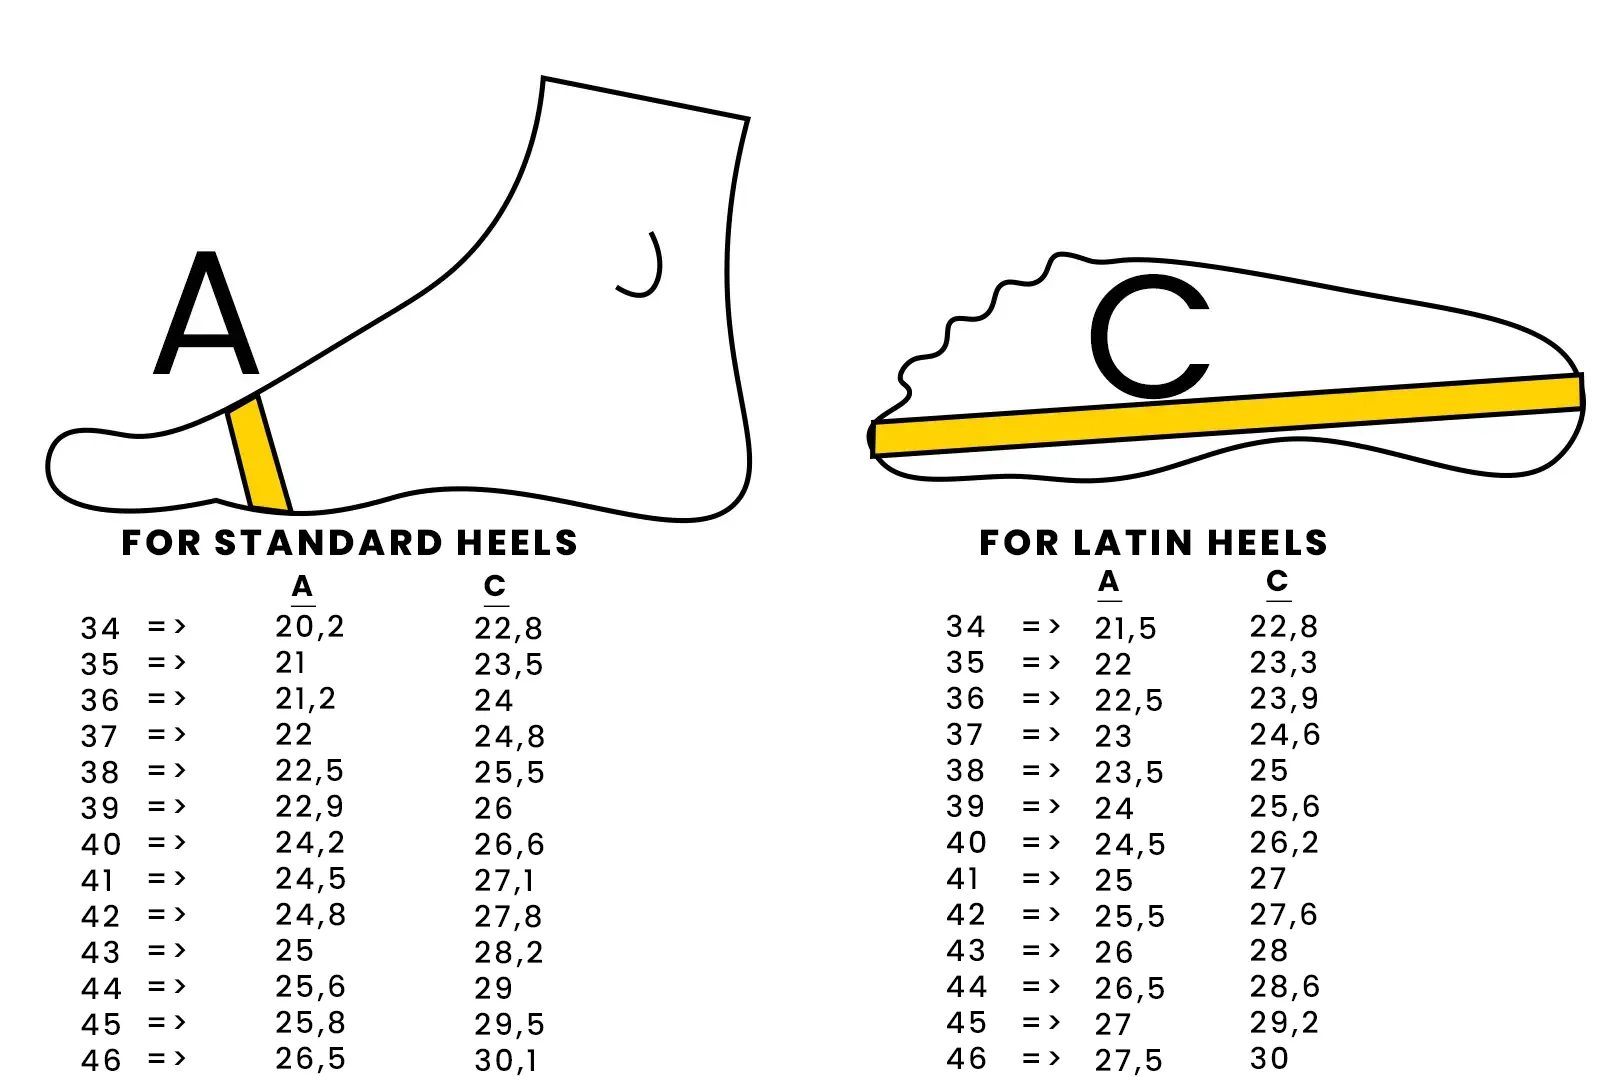 Finding Your Shoe Size & How to Measure